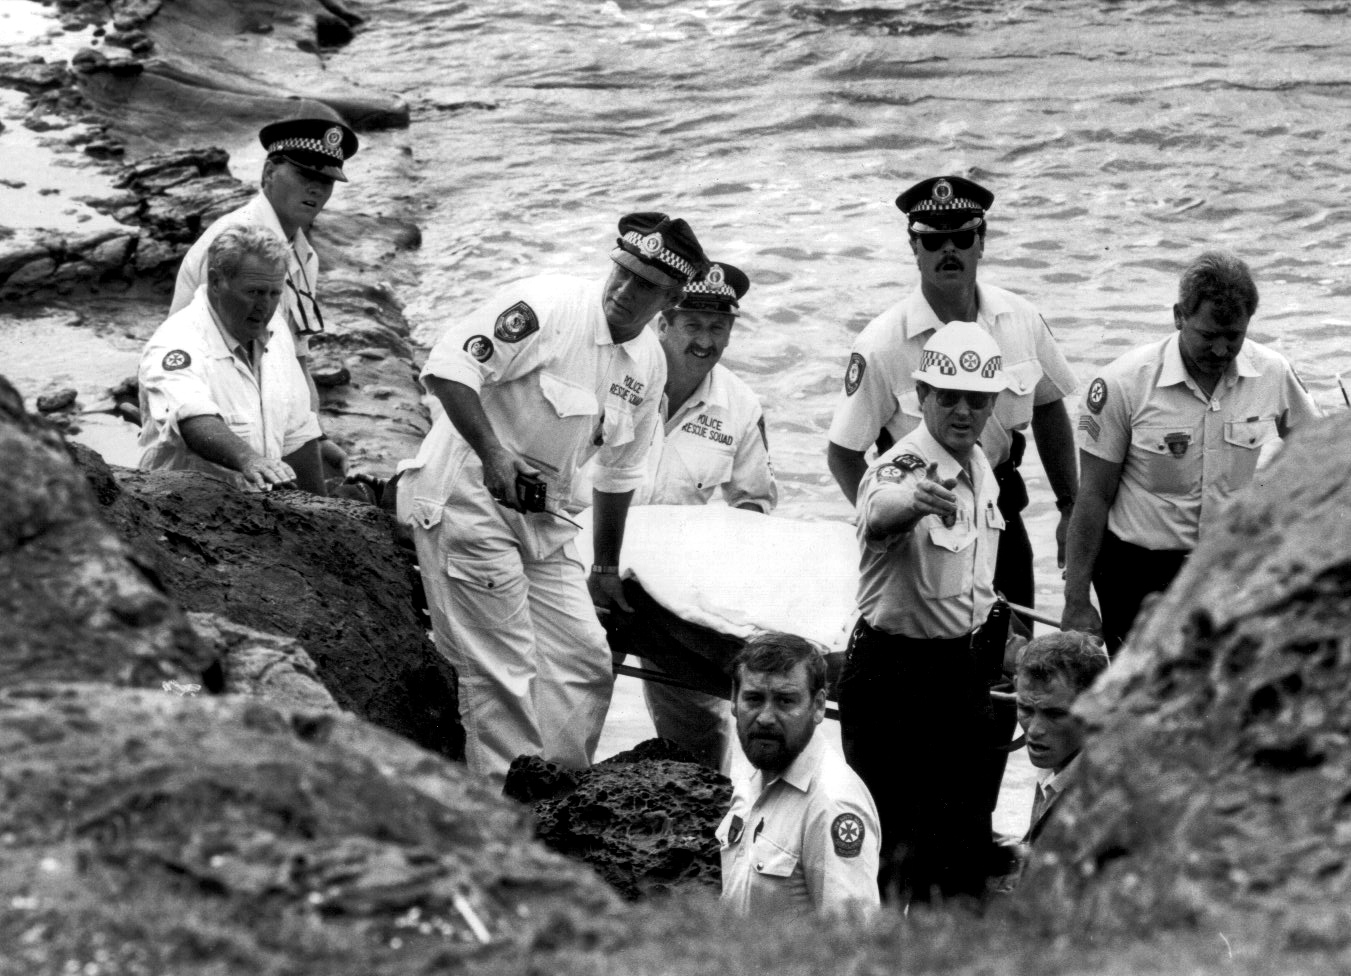 RESCUE AT WOLLONGONG LIGHT HOUSE A/O BOB LEWIS, CST MARK MULREADY, SENSGT TED DOHERTY, SENCON GARY THOMPSON, PARAMEDIC STEVE POLLARD, CST TONY FERRIS, A/O KEVIN DENT (POINTING), PARAMEDIC TERRY MORROW, A/O ANDREW GROVES (PARTIALLY HIDDEN ON LOWER RIGHT) 1988